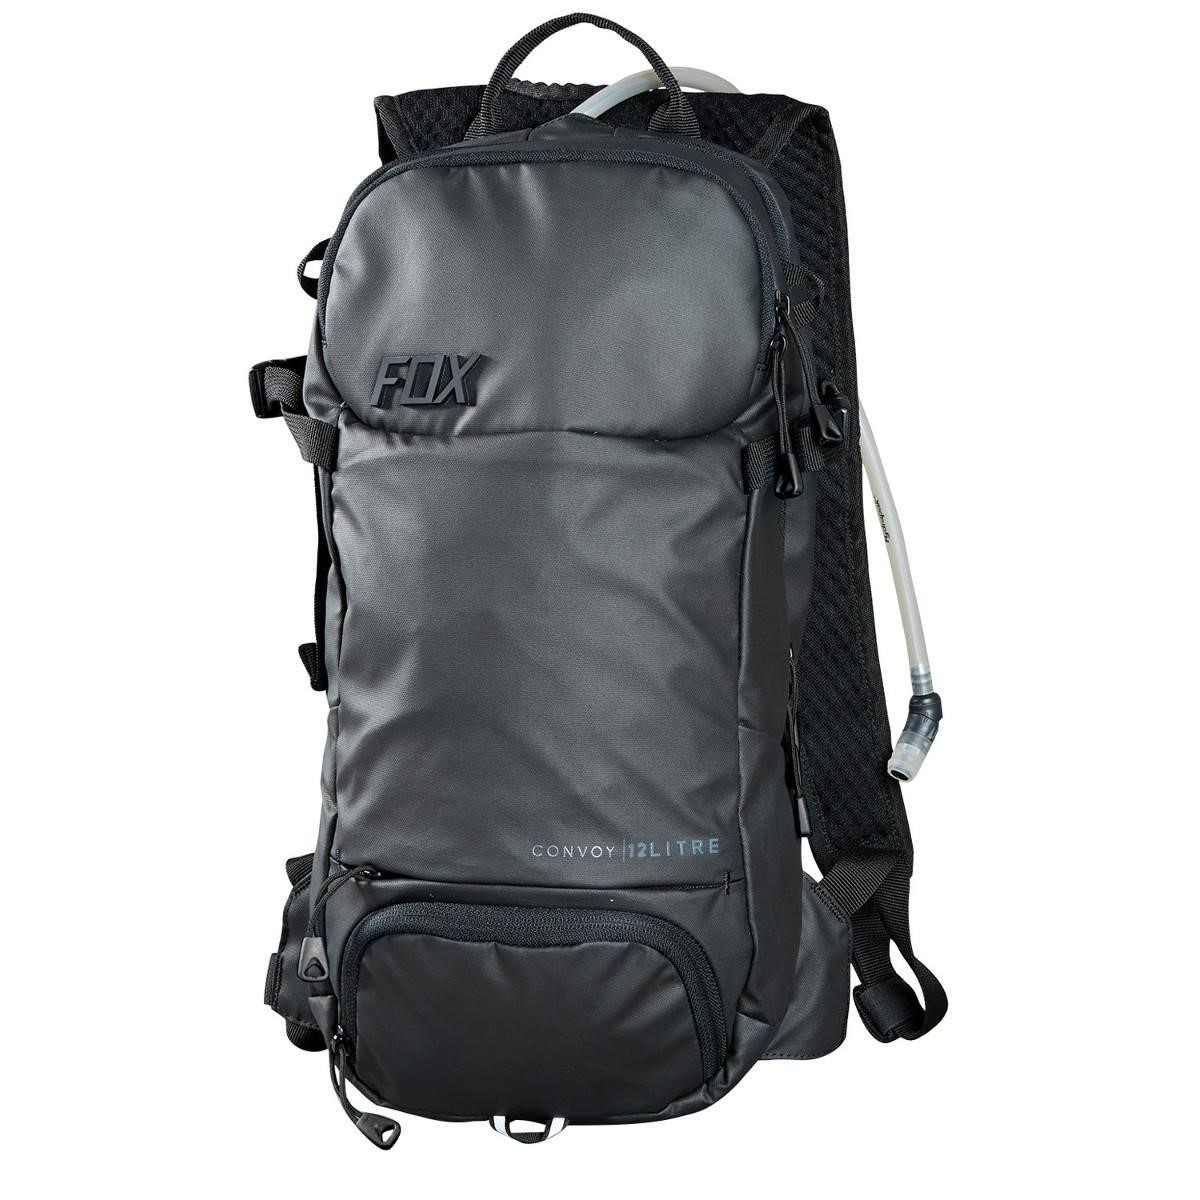 Fox Backpack with Hydration System Compartment Convoy Black